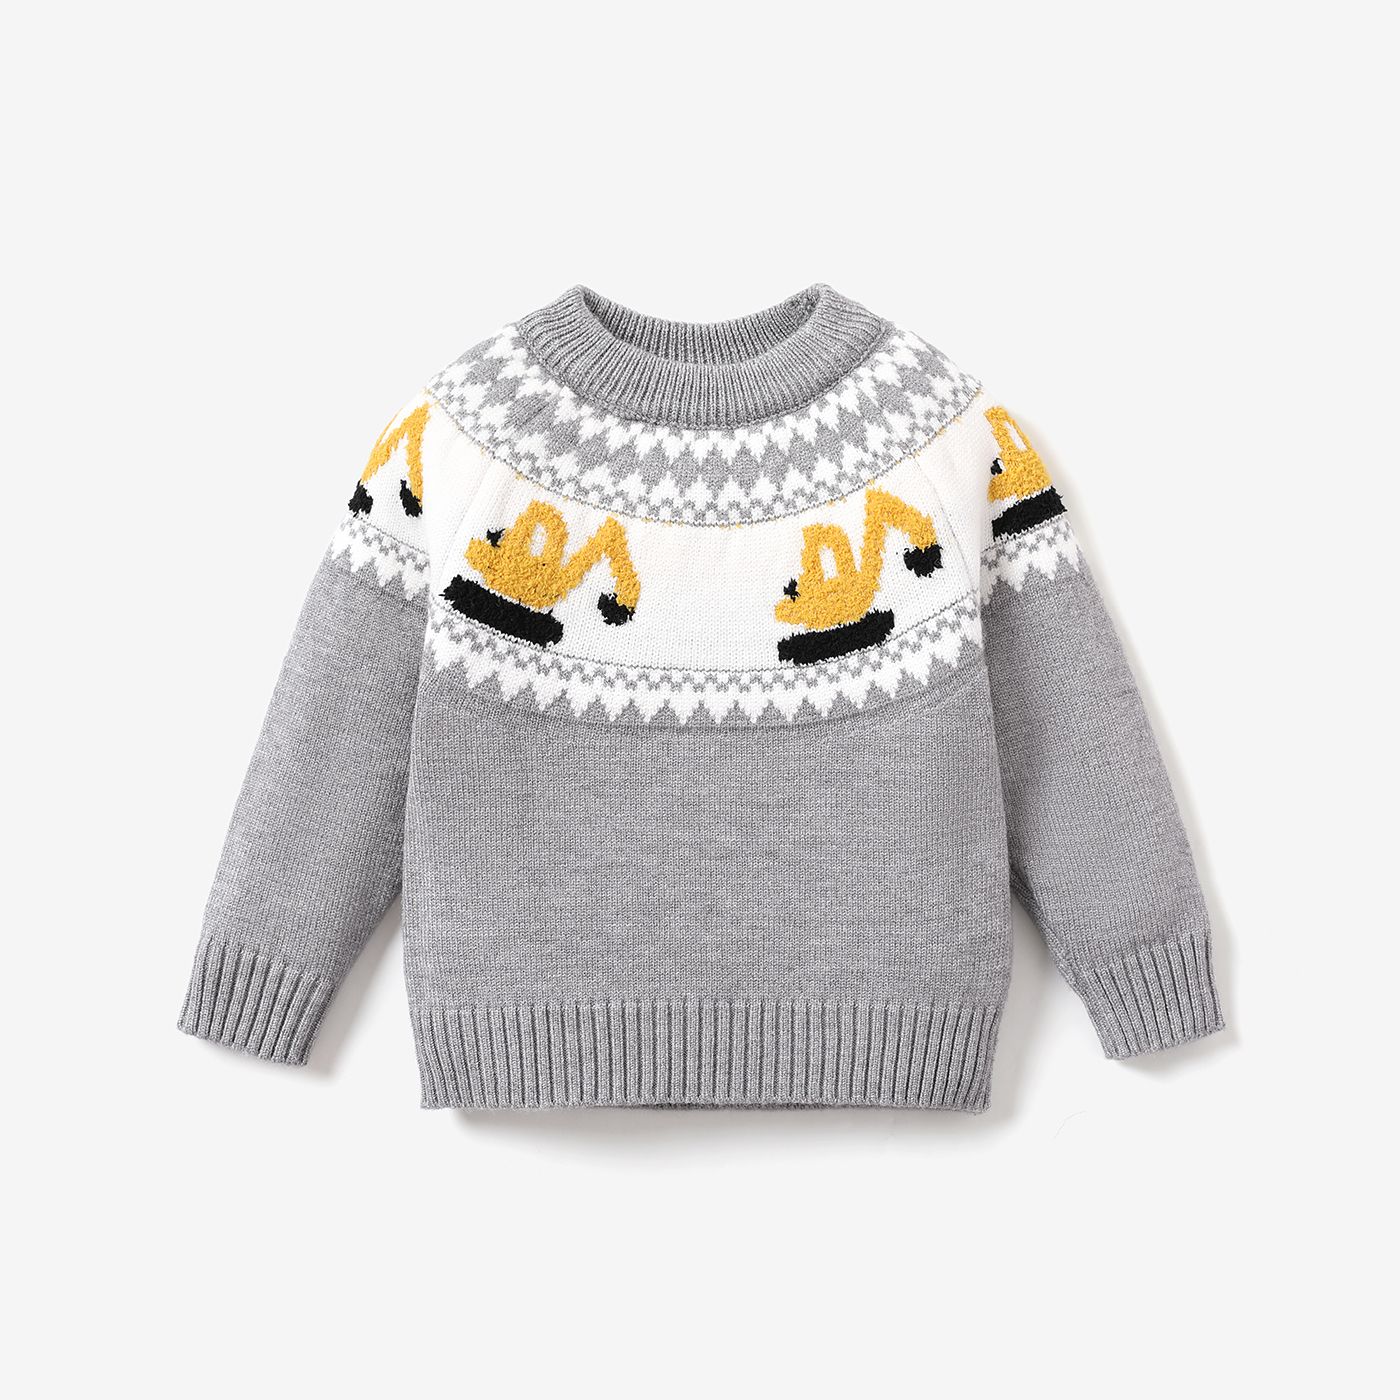 Baby Boy Excavator Pattern Knitted Pullover Sweater